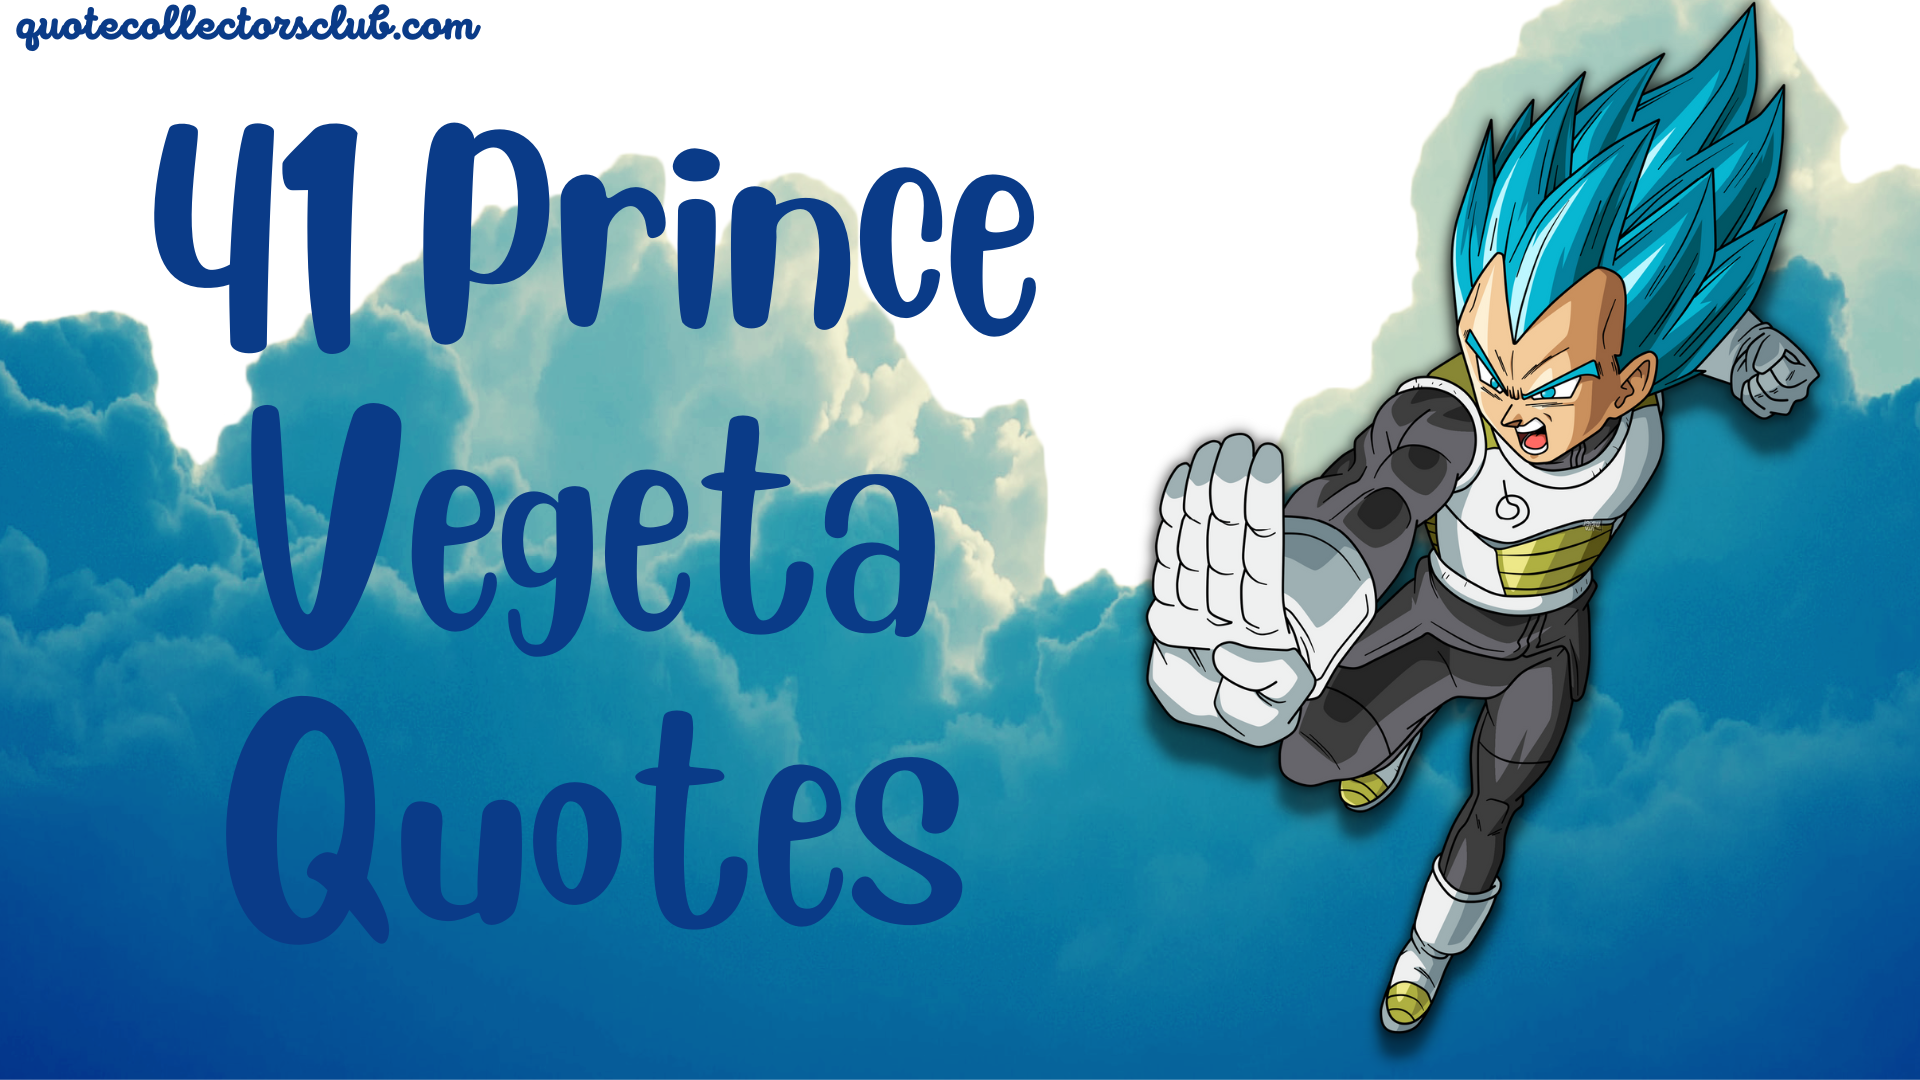 41 Vegeta Quotes To Pump Attitude and Strength In You